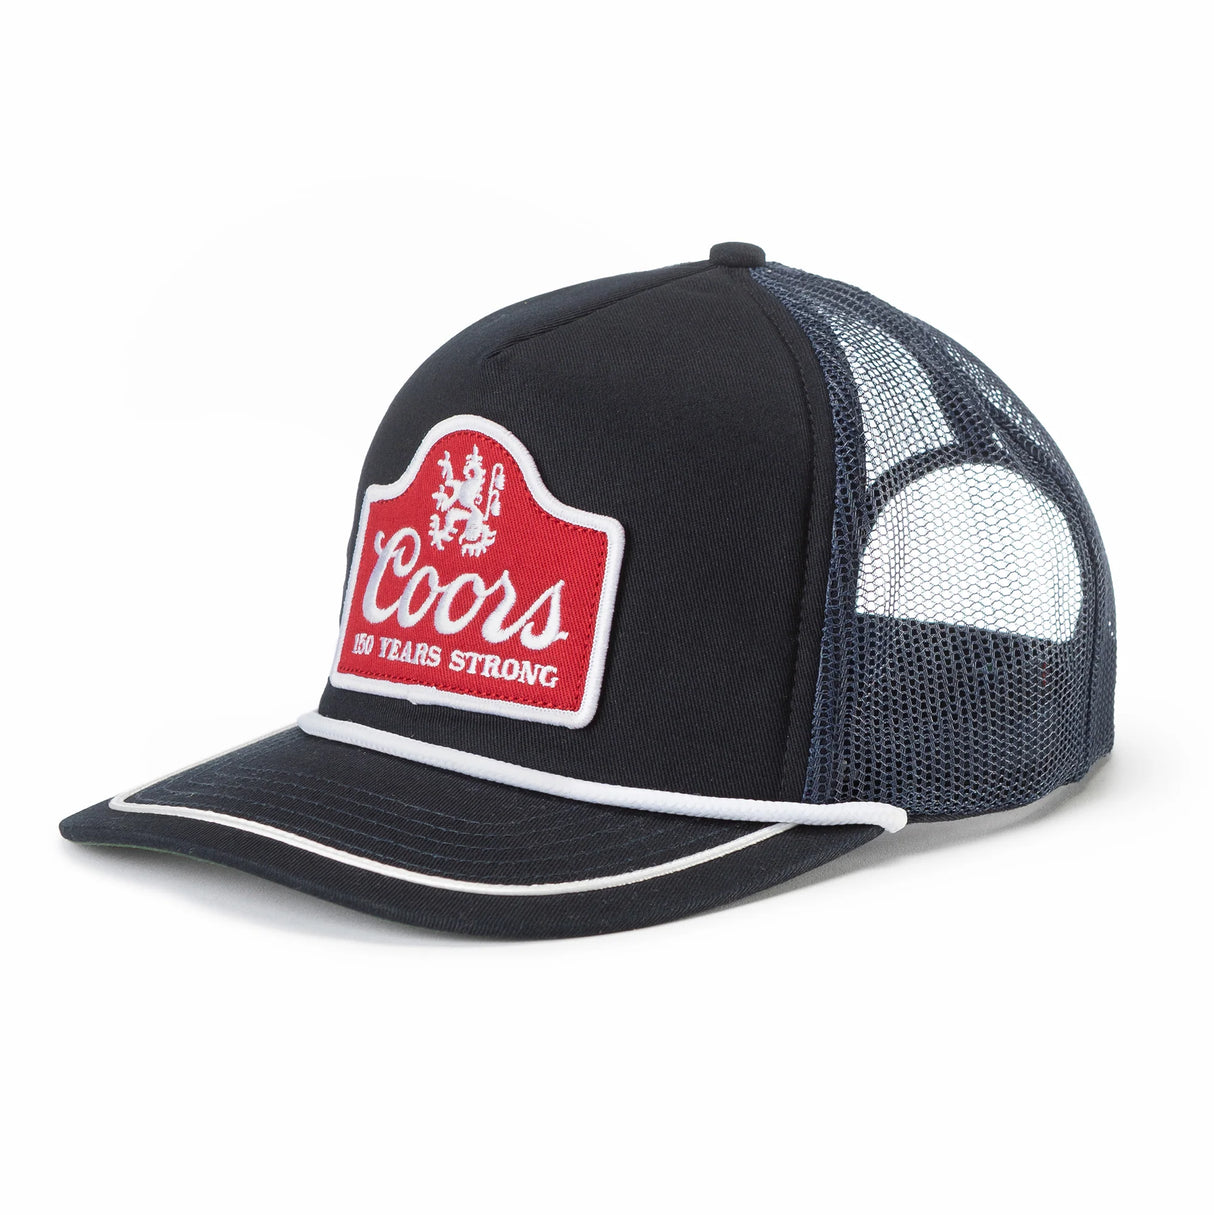 Seager x Coors Banquet 150 Trucker Navy Snapback Hat